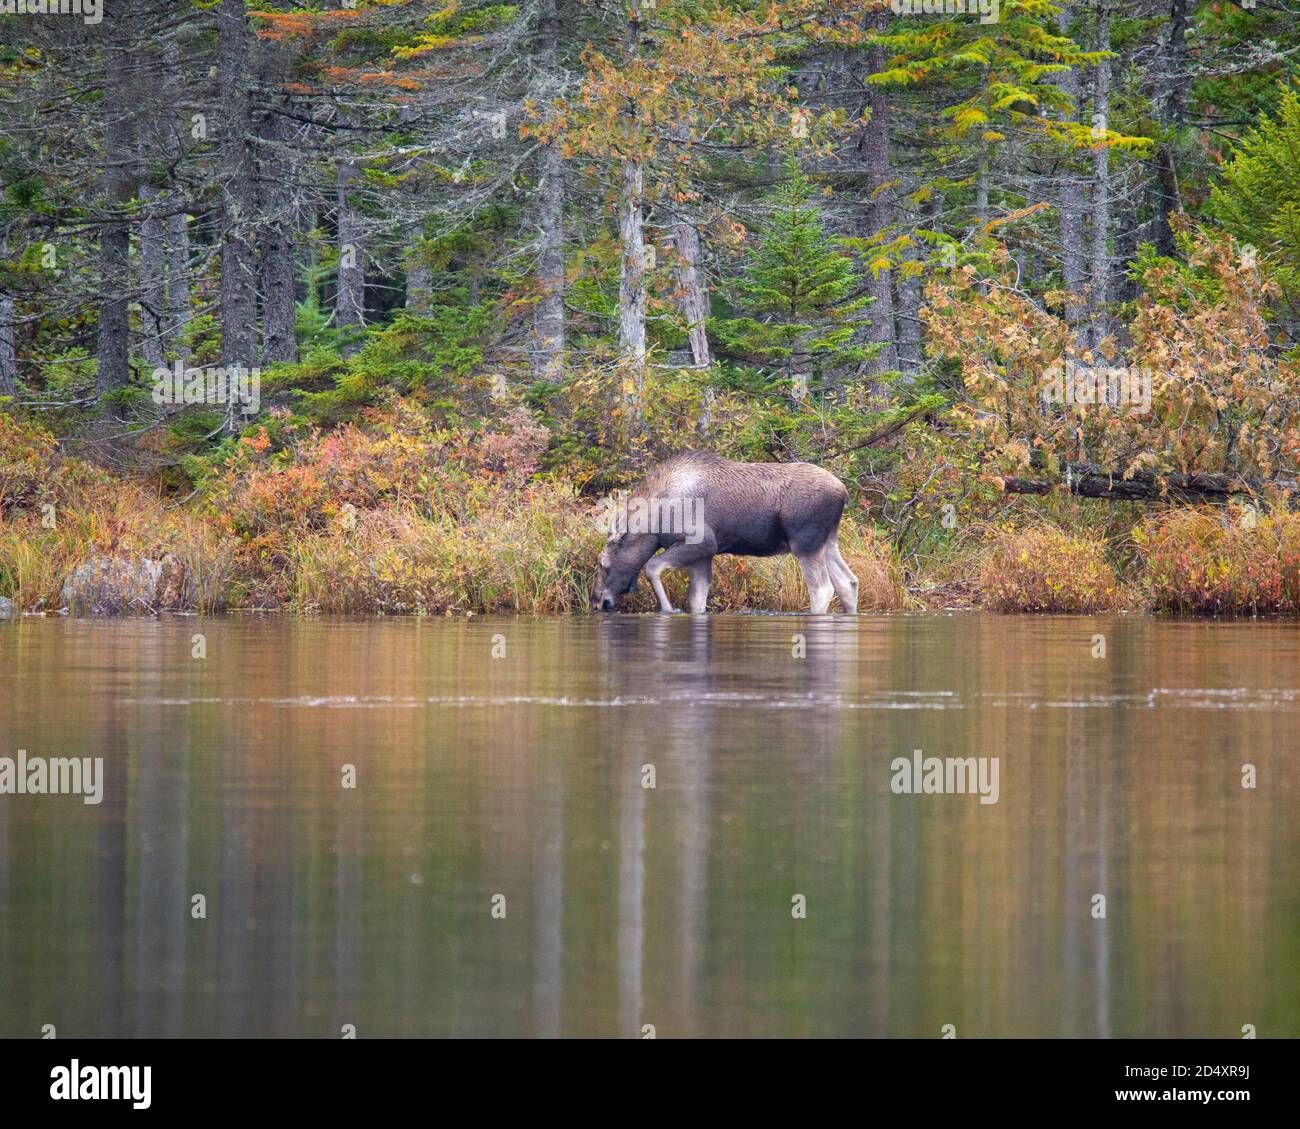 Moose Wading in Sandy Pond, Baxter state Park Maine durante la Fogy Fall Day. Foto Stock